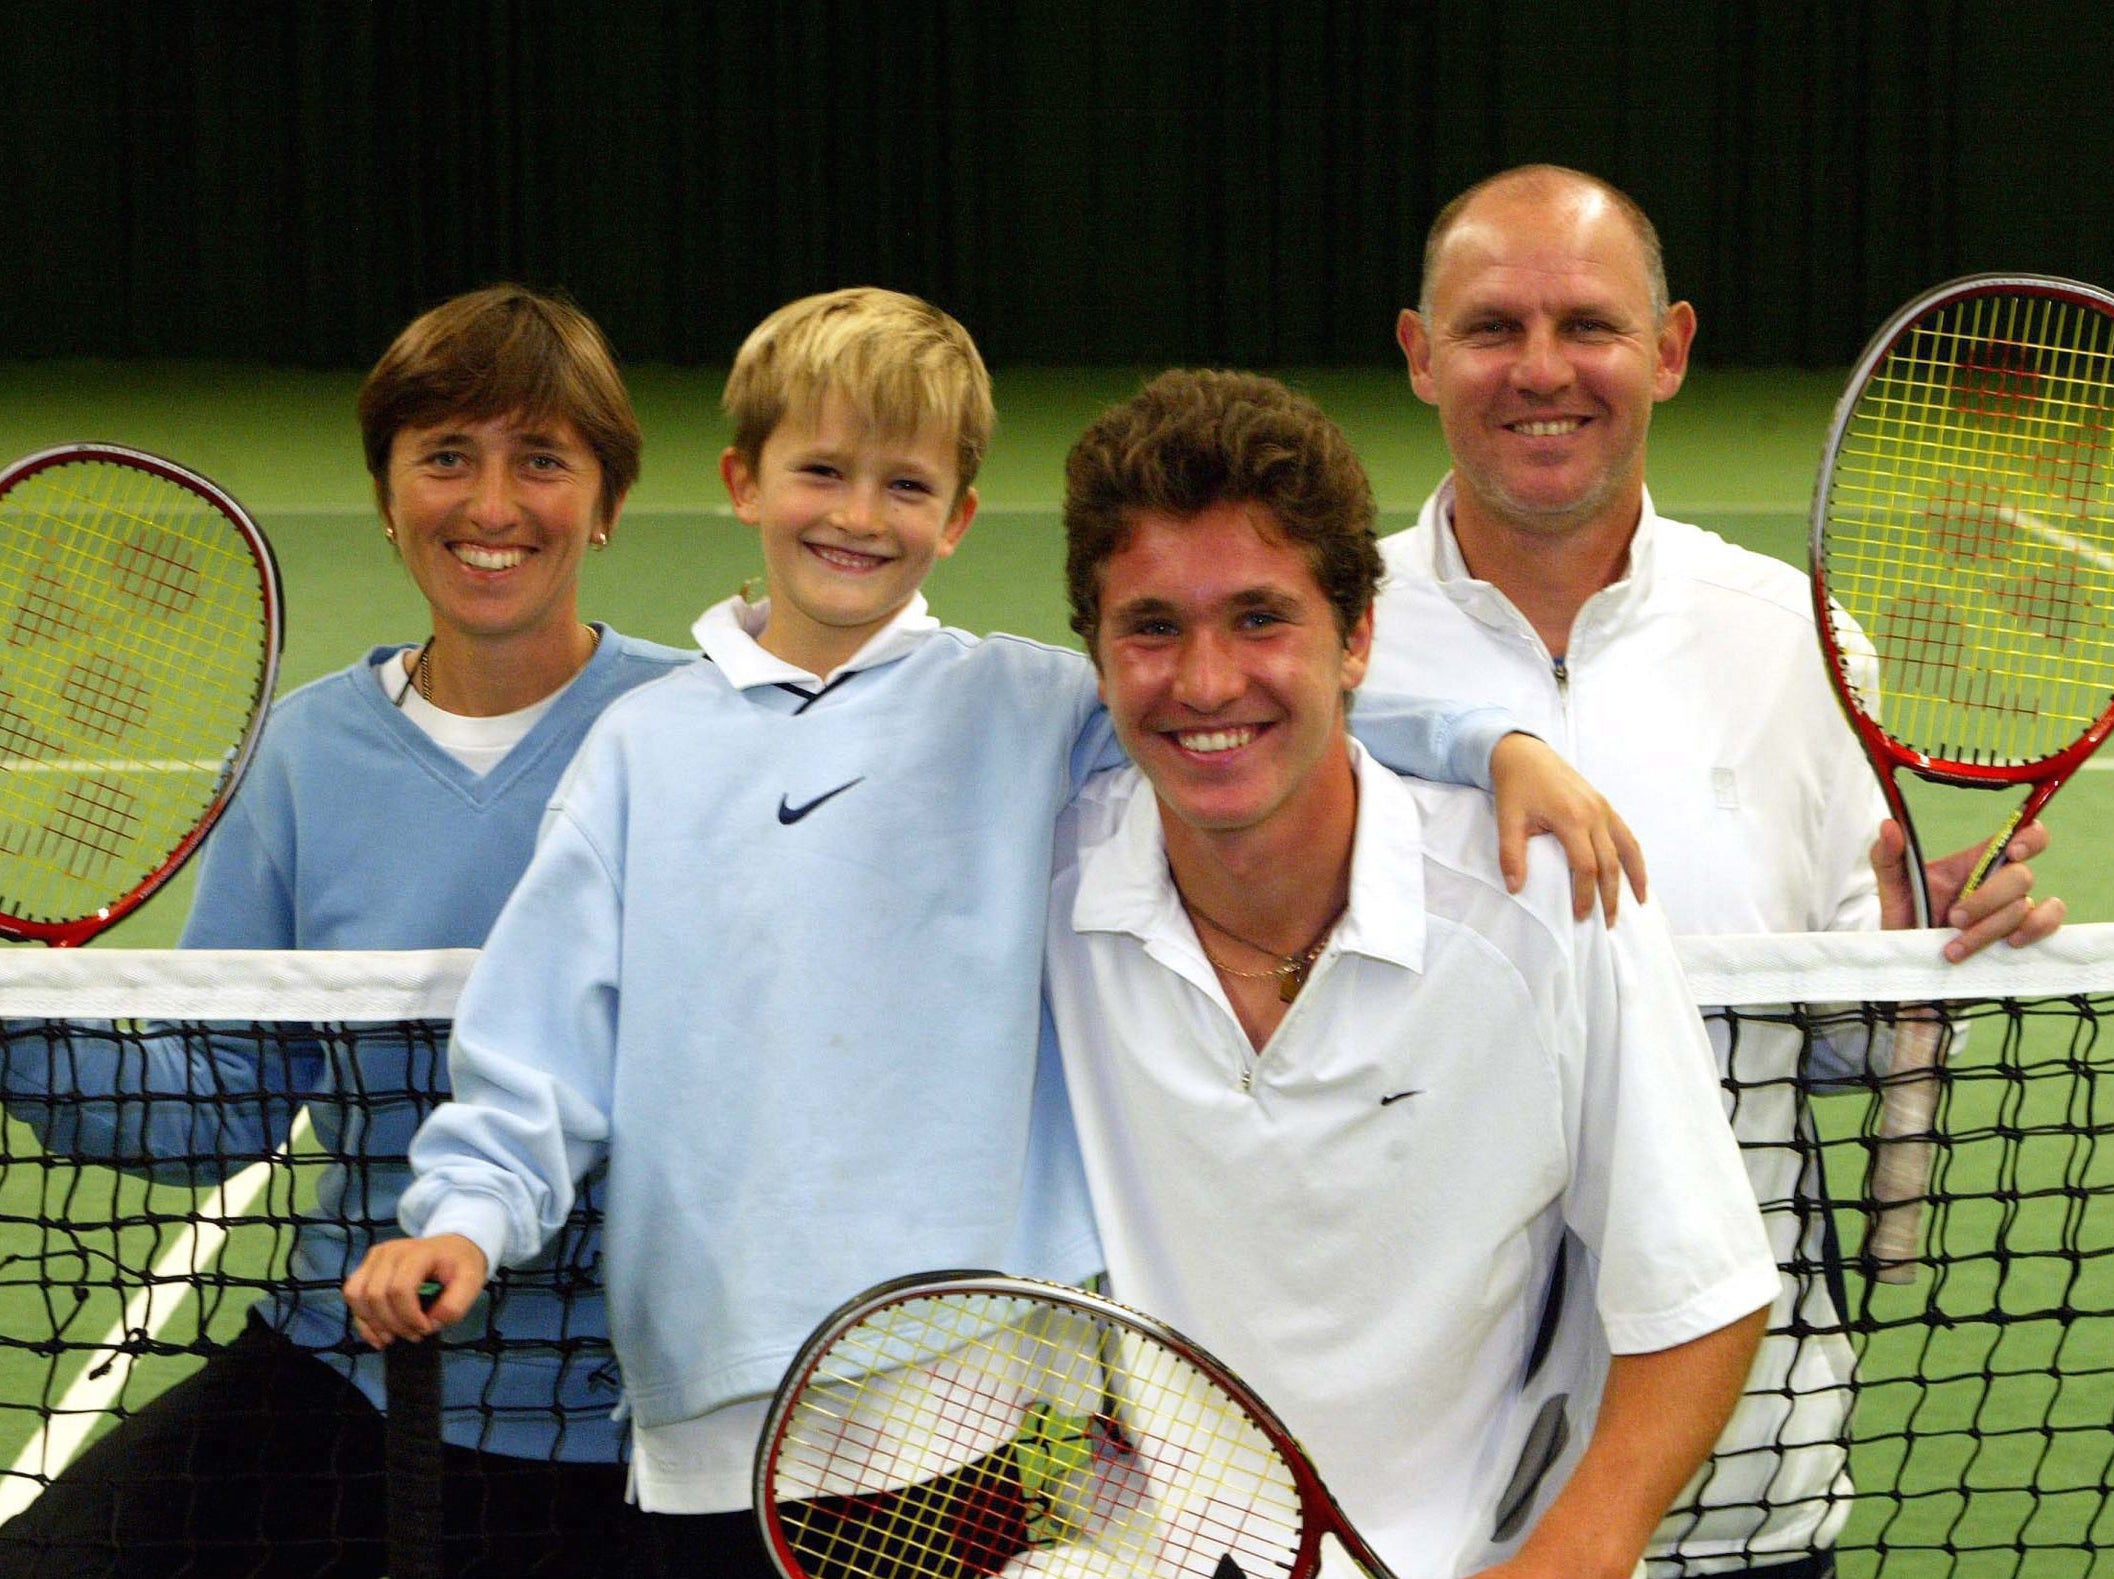 A young Zverev with his mother, father and older brother, in 2003